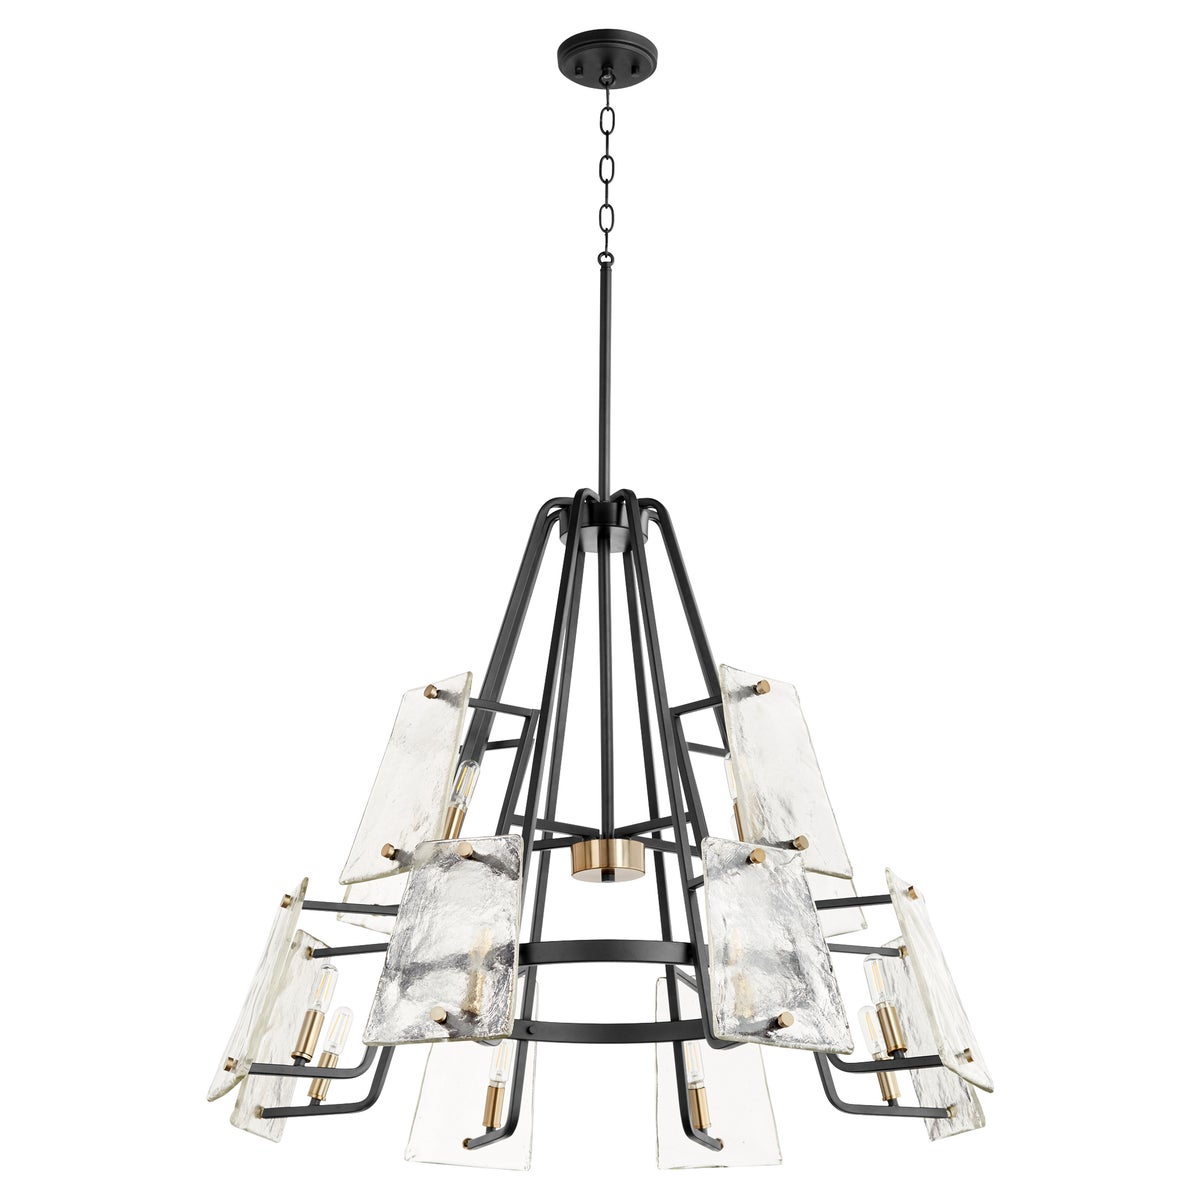 Outdoor chandelier with conical shape, linear framing, and frosted glass trapezoid shades. Mid-century modern design with aged brass-noir finish. Suspended from chain and stem mounting system. Suitable for covered outdoor spaces. 36"W x 30"H.